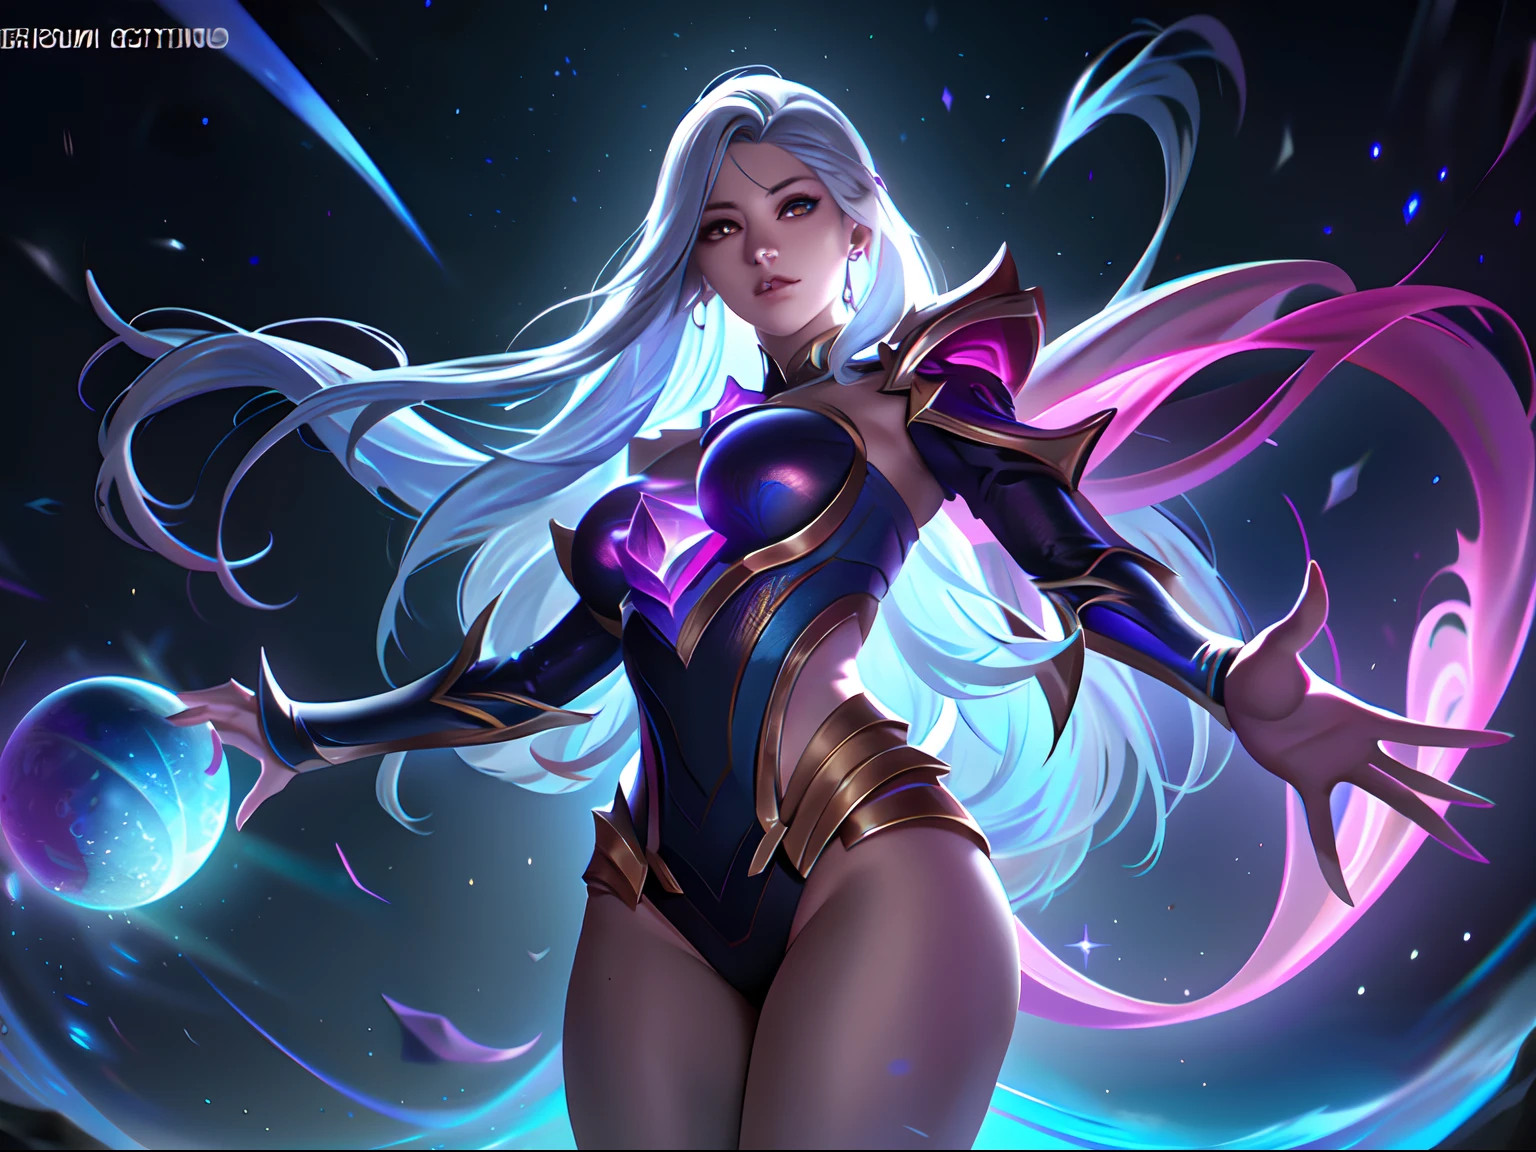 (League of Legends:1.5),Astrid, the Graviton Slinger, is depicted in her splashart as a powerful and enigmatic force, wielding her gravitational manipulation abilities with mastery. The scene takes place in a celestial realm, where stars and cosmic energy illuminate the vastness of space.

Astrid possesses an otherworldly beauty, with flowing silver-white hair that seems to shimmer with the brilliance of distant stars. Her skin has a faint celestial glow, radiating with the power she commands. She wears a sleek, futuristic suit adorned with intricate patterns that resemble constellations and gravitational fields. The suit hugs her figure, emphasizing her strength and agility.

In the center of her palms, Astrid generates orbs of gravitational energy, each pulsating with vibrant hues of purple and blue. These energy orbs form the foundation for her gravitational abilities. Surrounding her, smaller orbs and filaments of energy spin and orbit, representing the gravitational fields she creates and manipulates.

Astrid's eyes emit an intense, piercing gaze, glowing with the same gravitational energy that courses through her. Her expression conveys both focus and determination, revealing her unwavering control over the forces she wields.

The backdrop of the splashart showcases the vast expanse of space, filled with distant galaxies and nebulae. Ethereal strands of gravitational energy weave through the cosmos, forming intricate patterns and connecting celestial bodies. The scene creates a sense of awe and wonder, as Astrid harnesses the fundamental forces of the universe.

The color palette is dominated by deep purples, blues, and blacks, reflecting the cosmic nature of Astrid's powers. The vibrant energy orbs stand out against the dark backdrop, adding a dynamic and captivating element to the splashart, splashart, linhas de corpo, cores vibrantes, detalhes requintados, cinemactic, artstation, rosto detalhado, por rossdraws, por Kienan Laf,normal hands,holding ball,